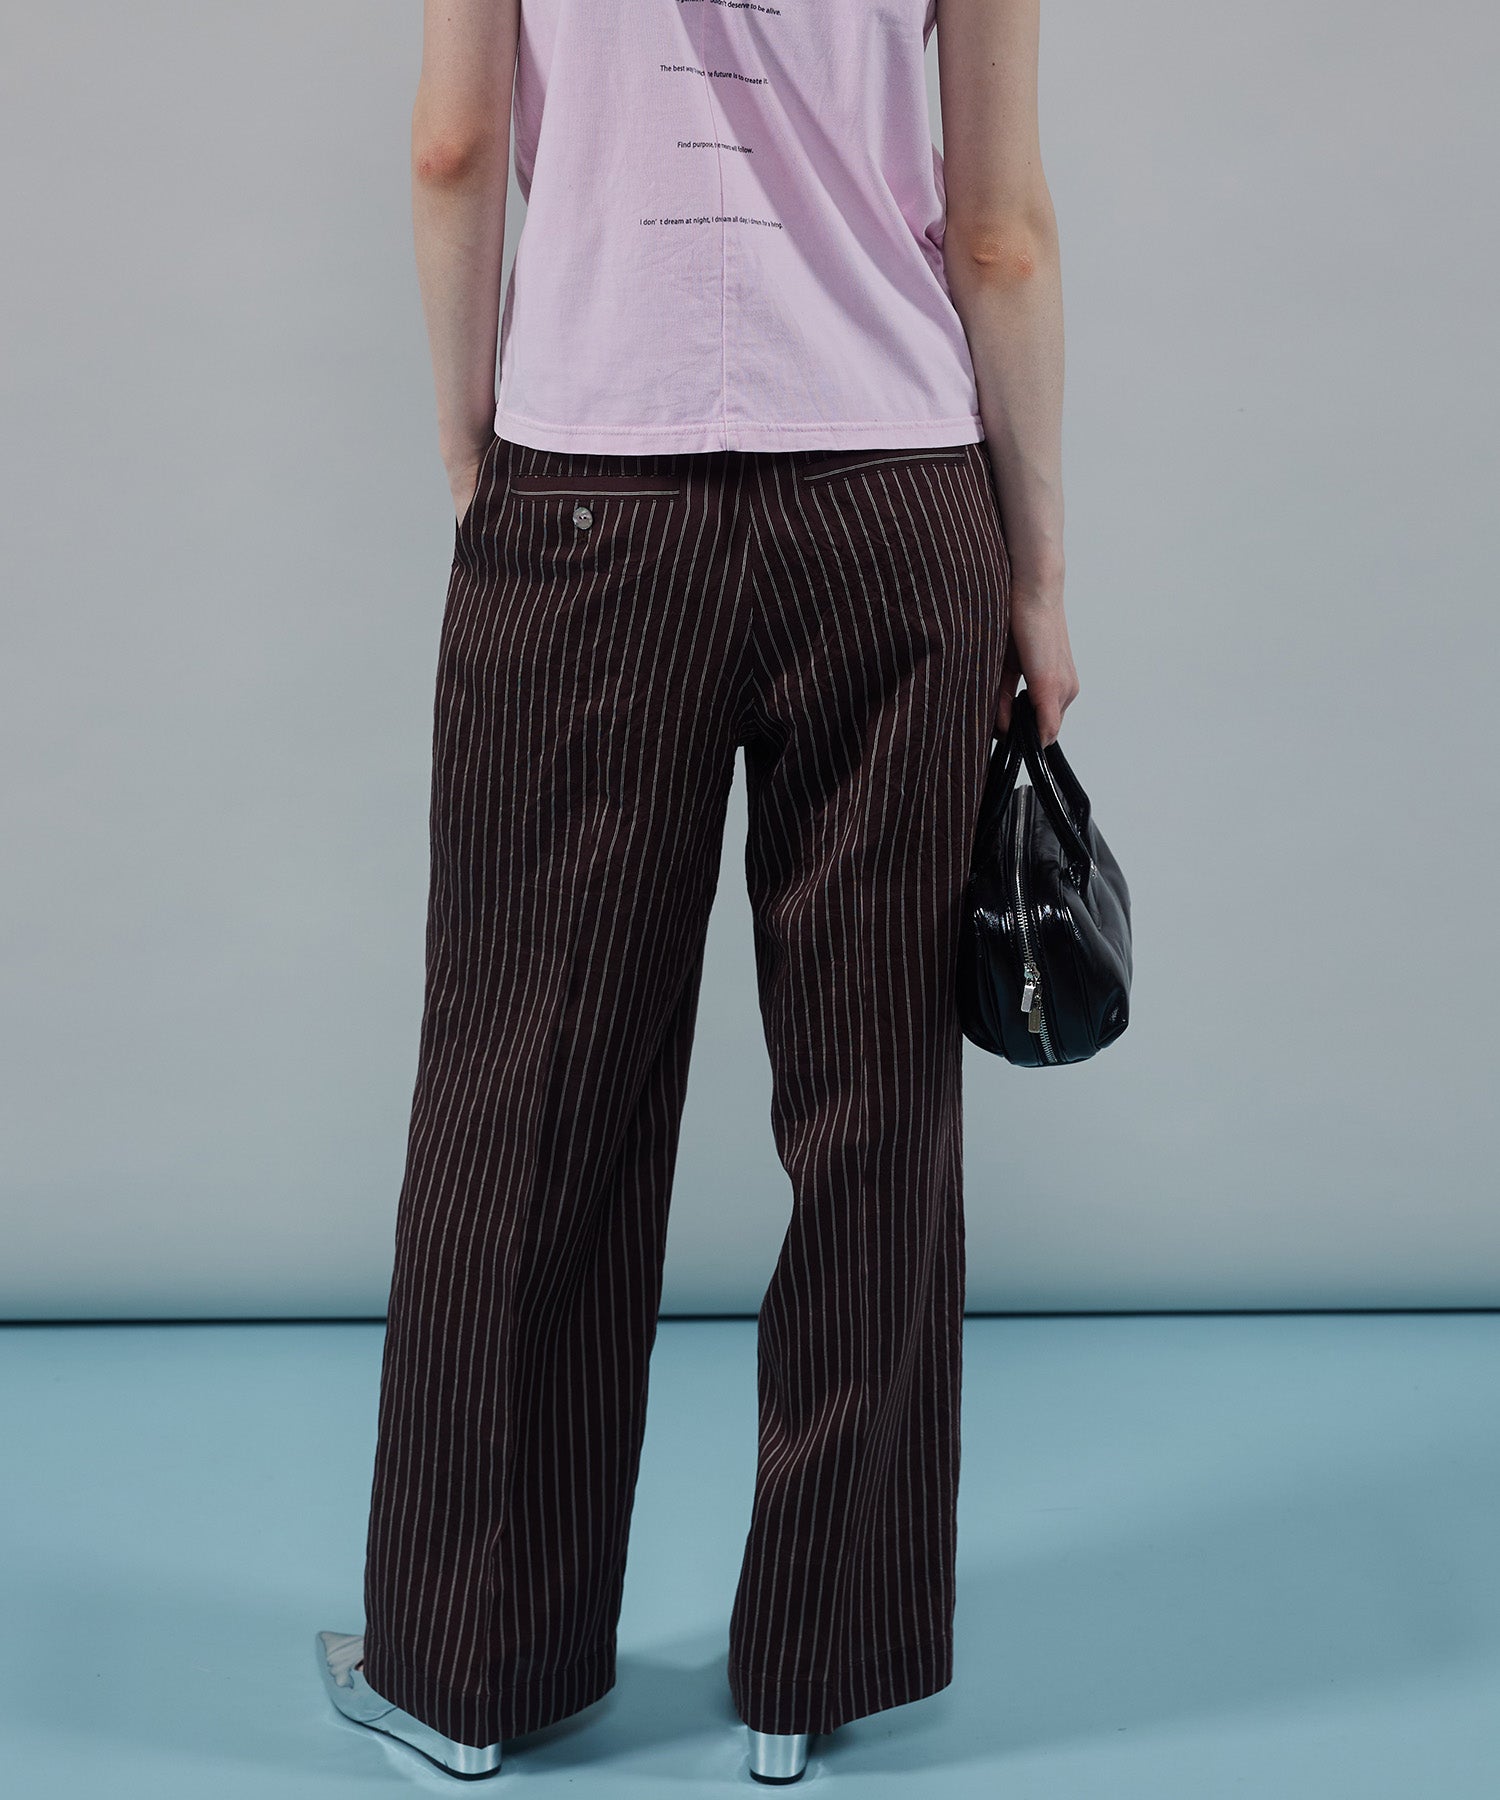 Washable Silky Stripe Easy Pants